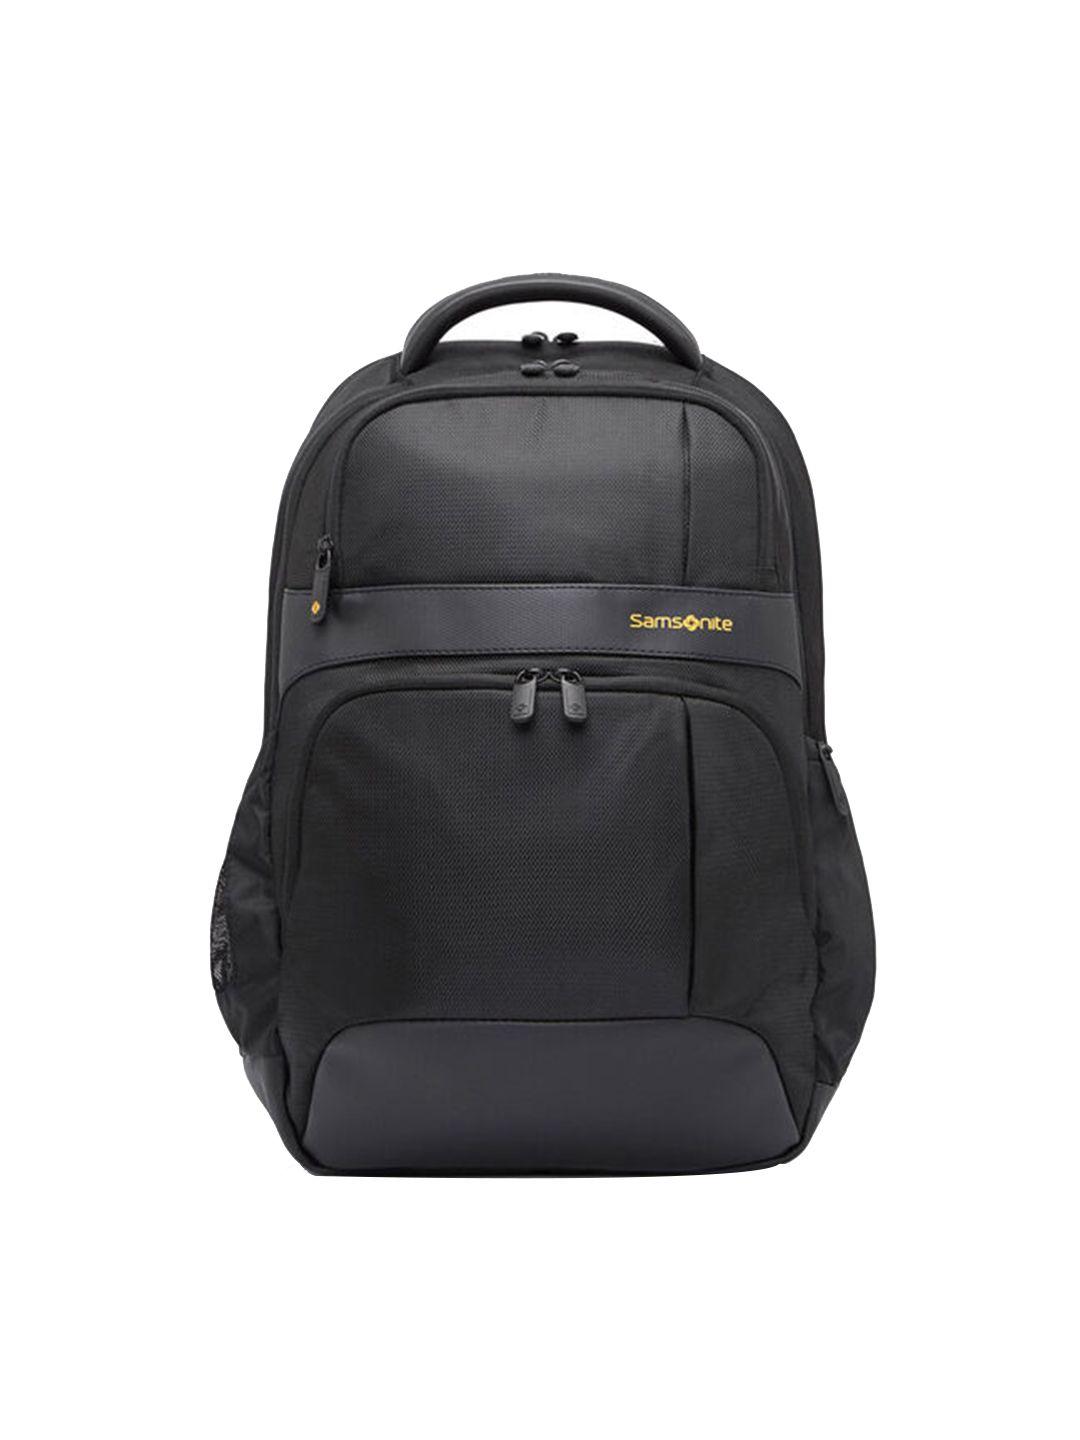 samsonite fashion backpack with anti-theft